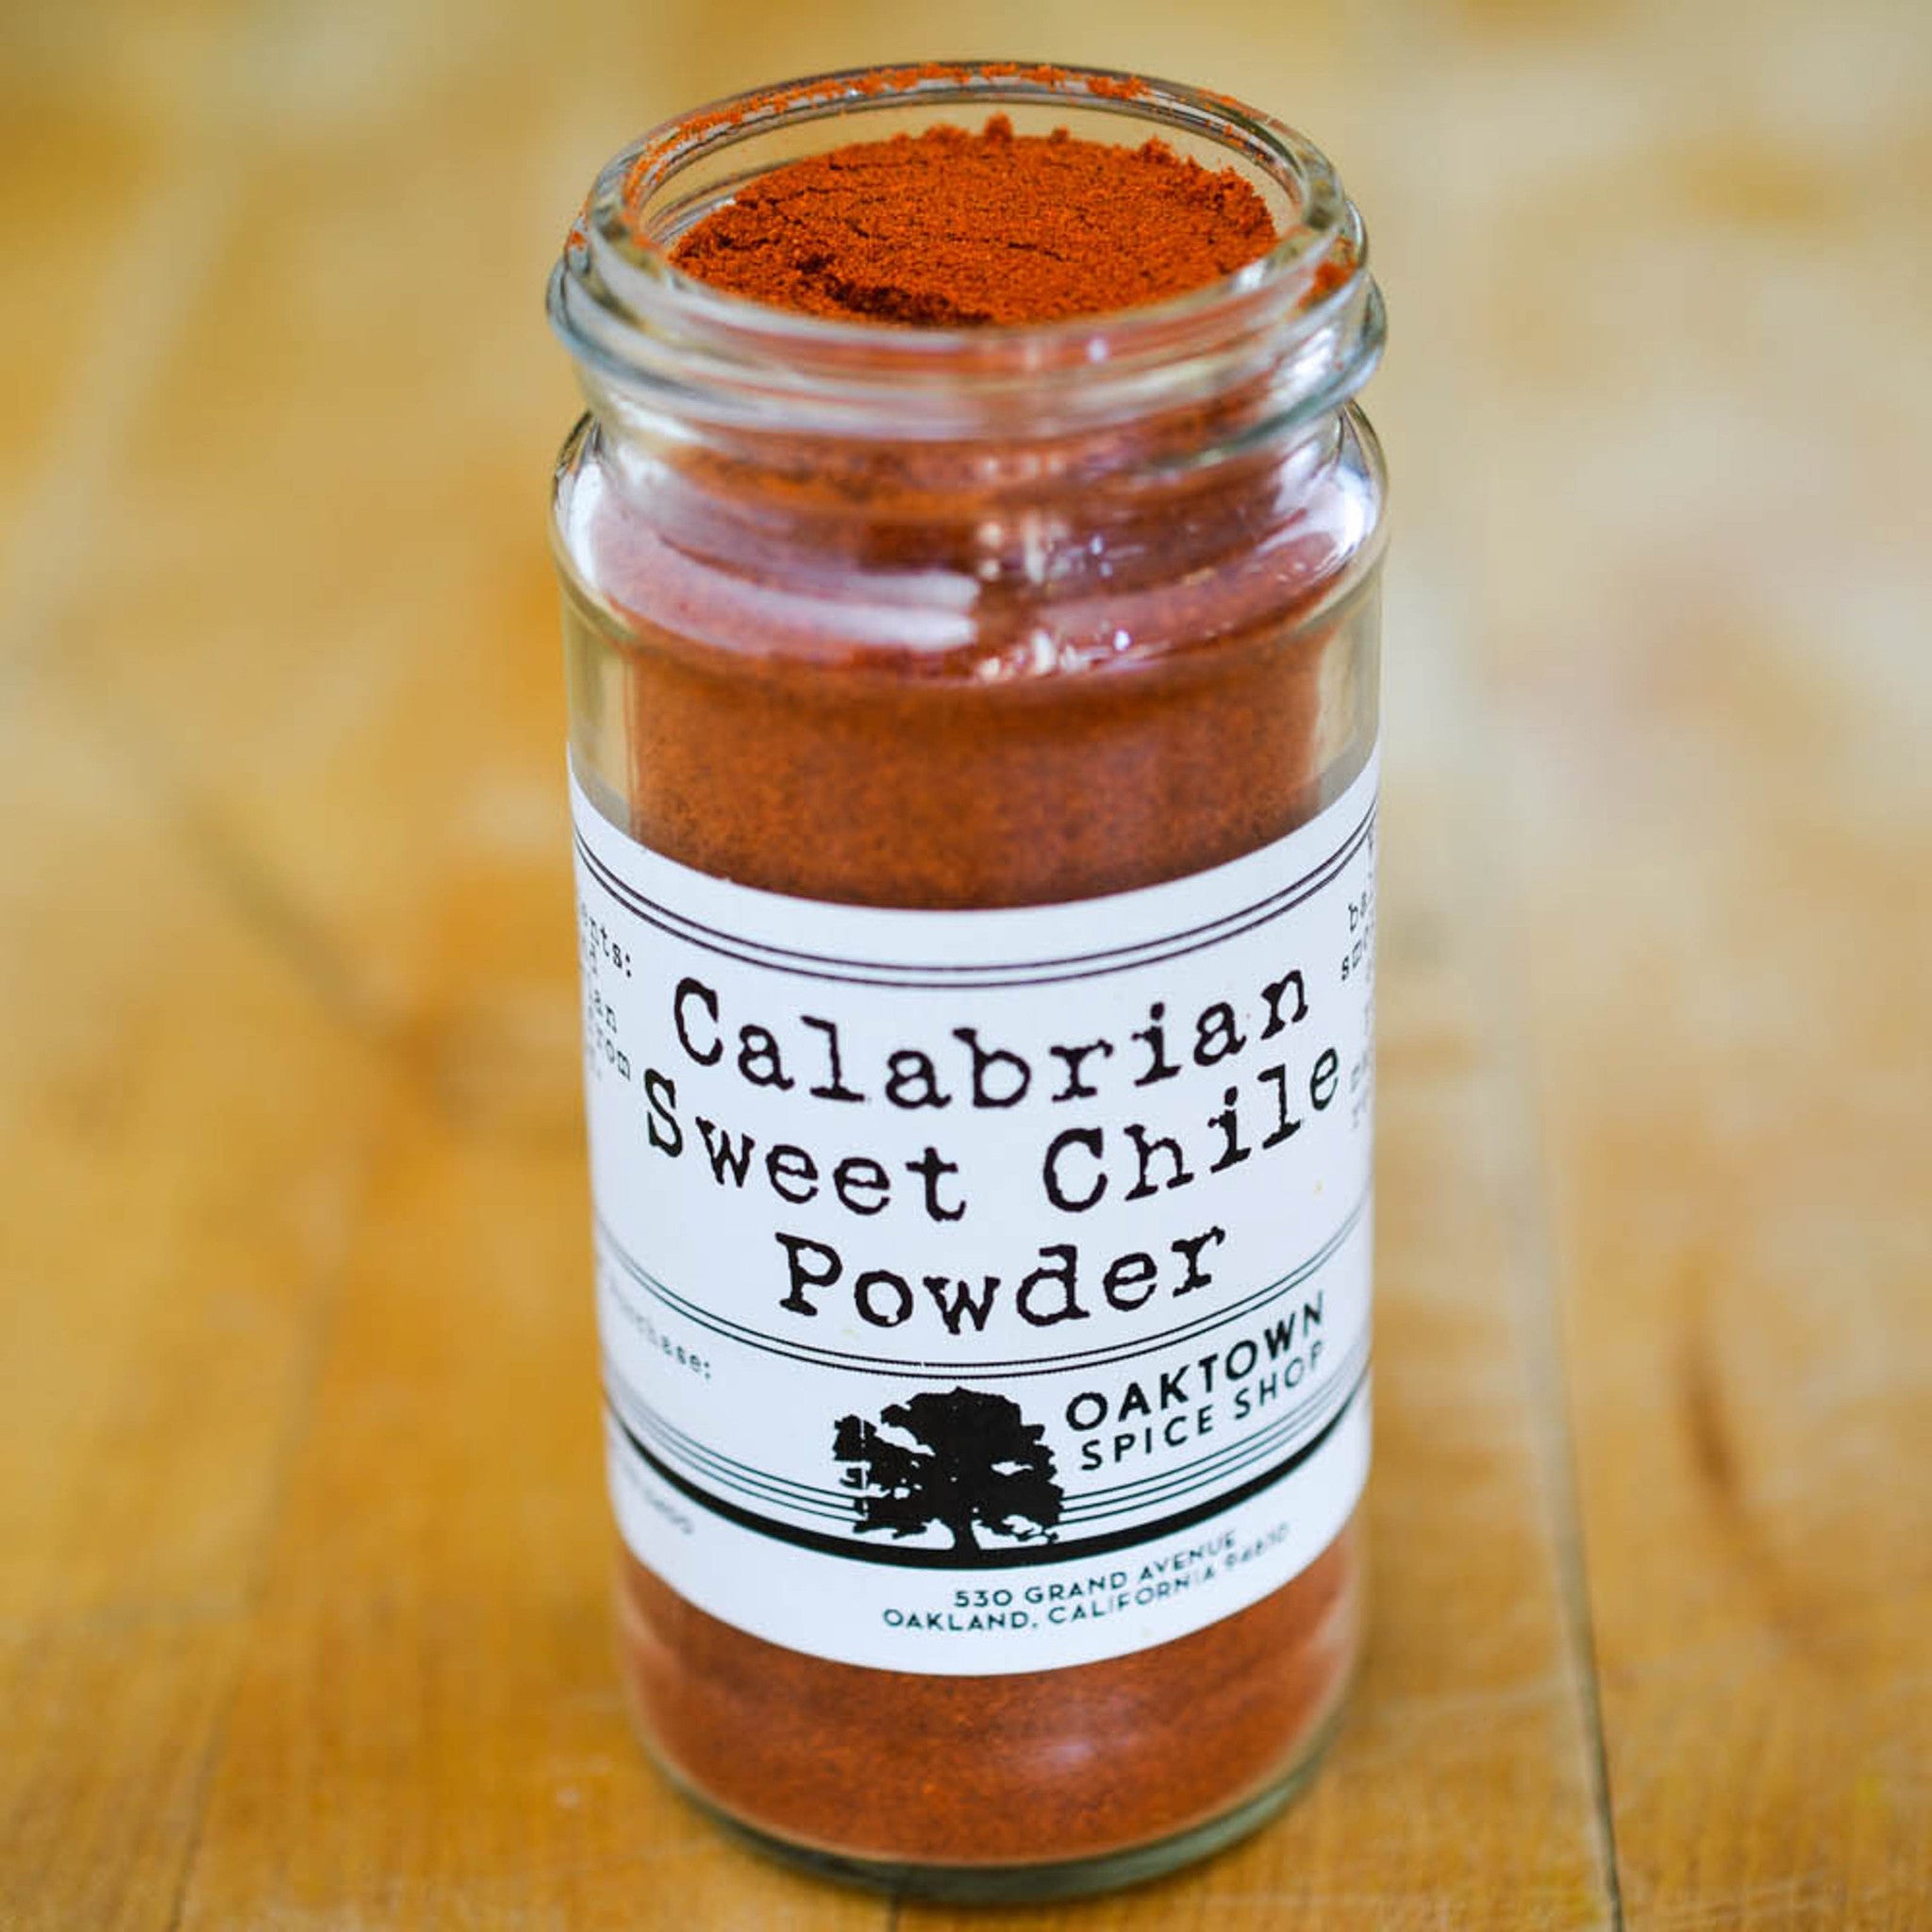 Calabrian Sweet Chile Powder Fresh Spice by Oaktown Spice Shop